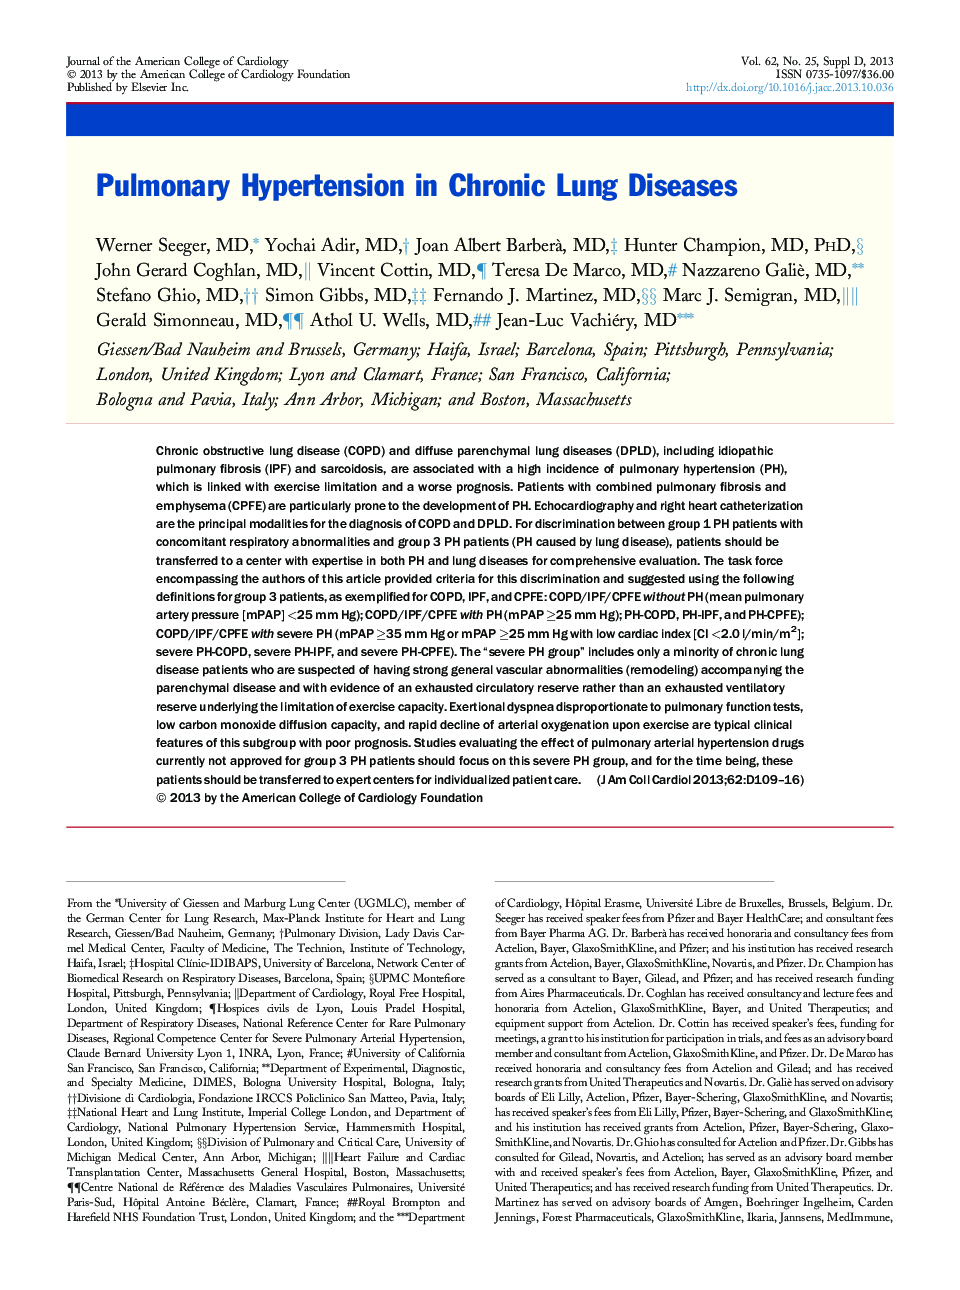 Pulmonary Hypertension in Chronic Lung Diseases 